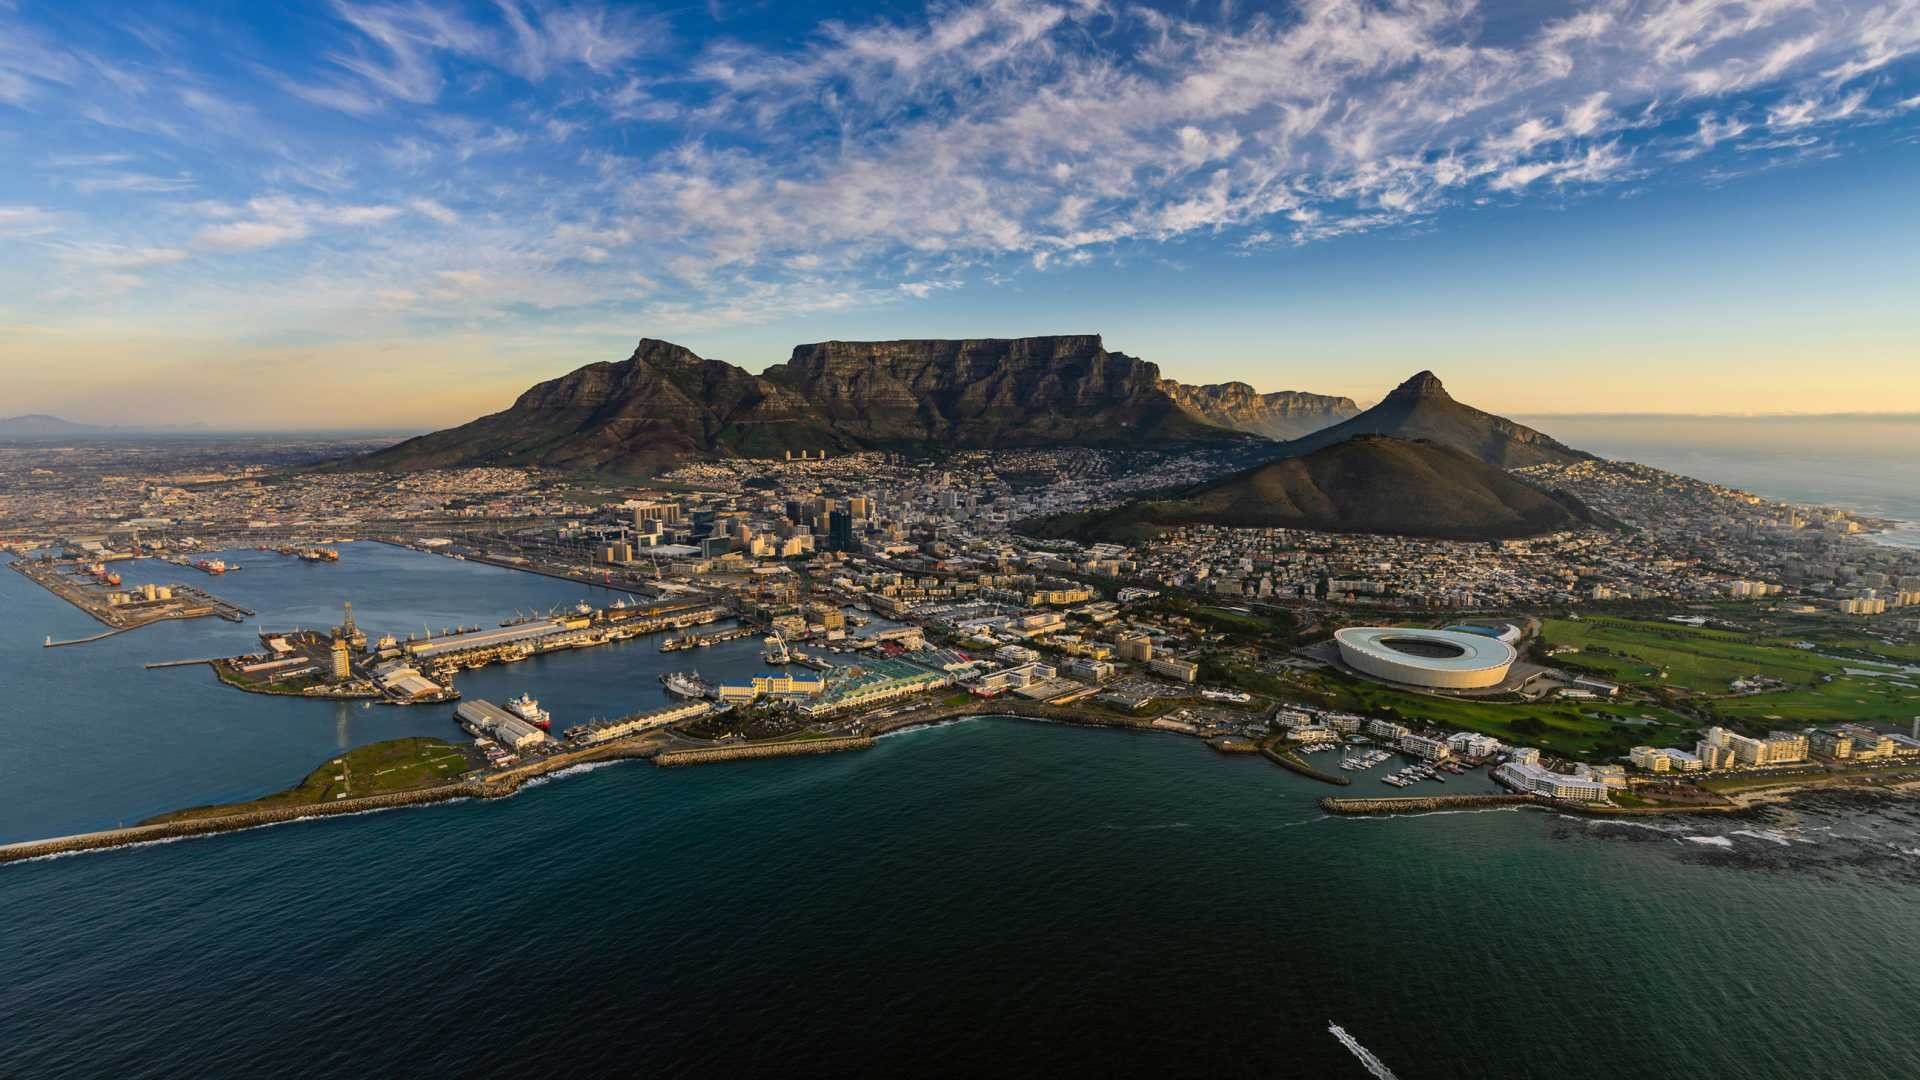 South Africa Holidays | Book For 2019/2020 With Our South-2020 Holidays In South Africa